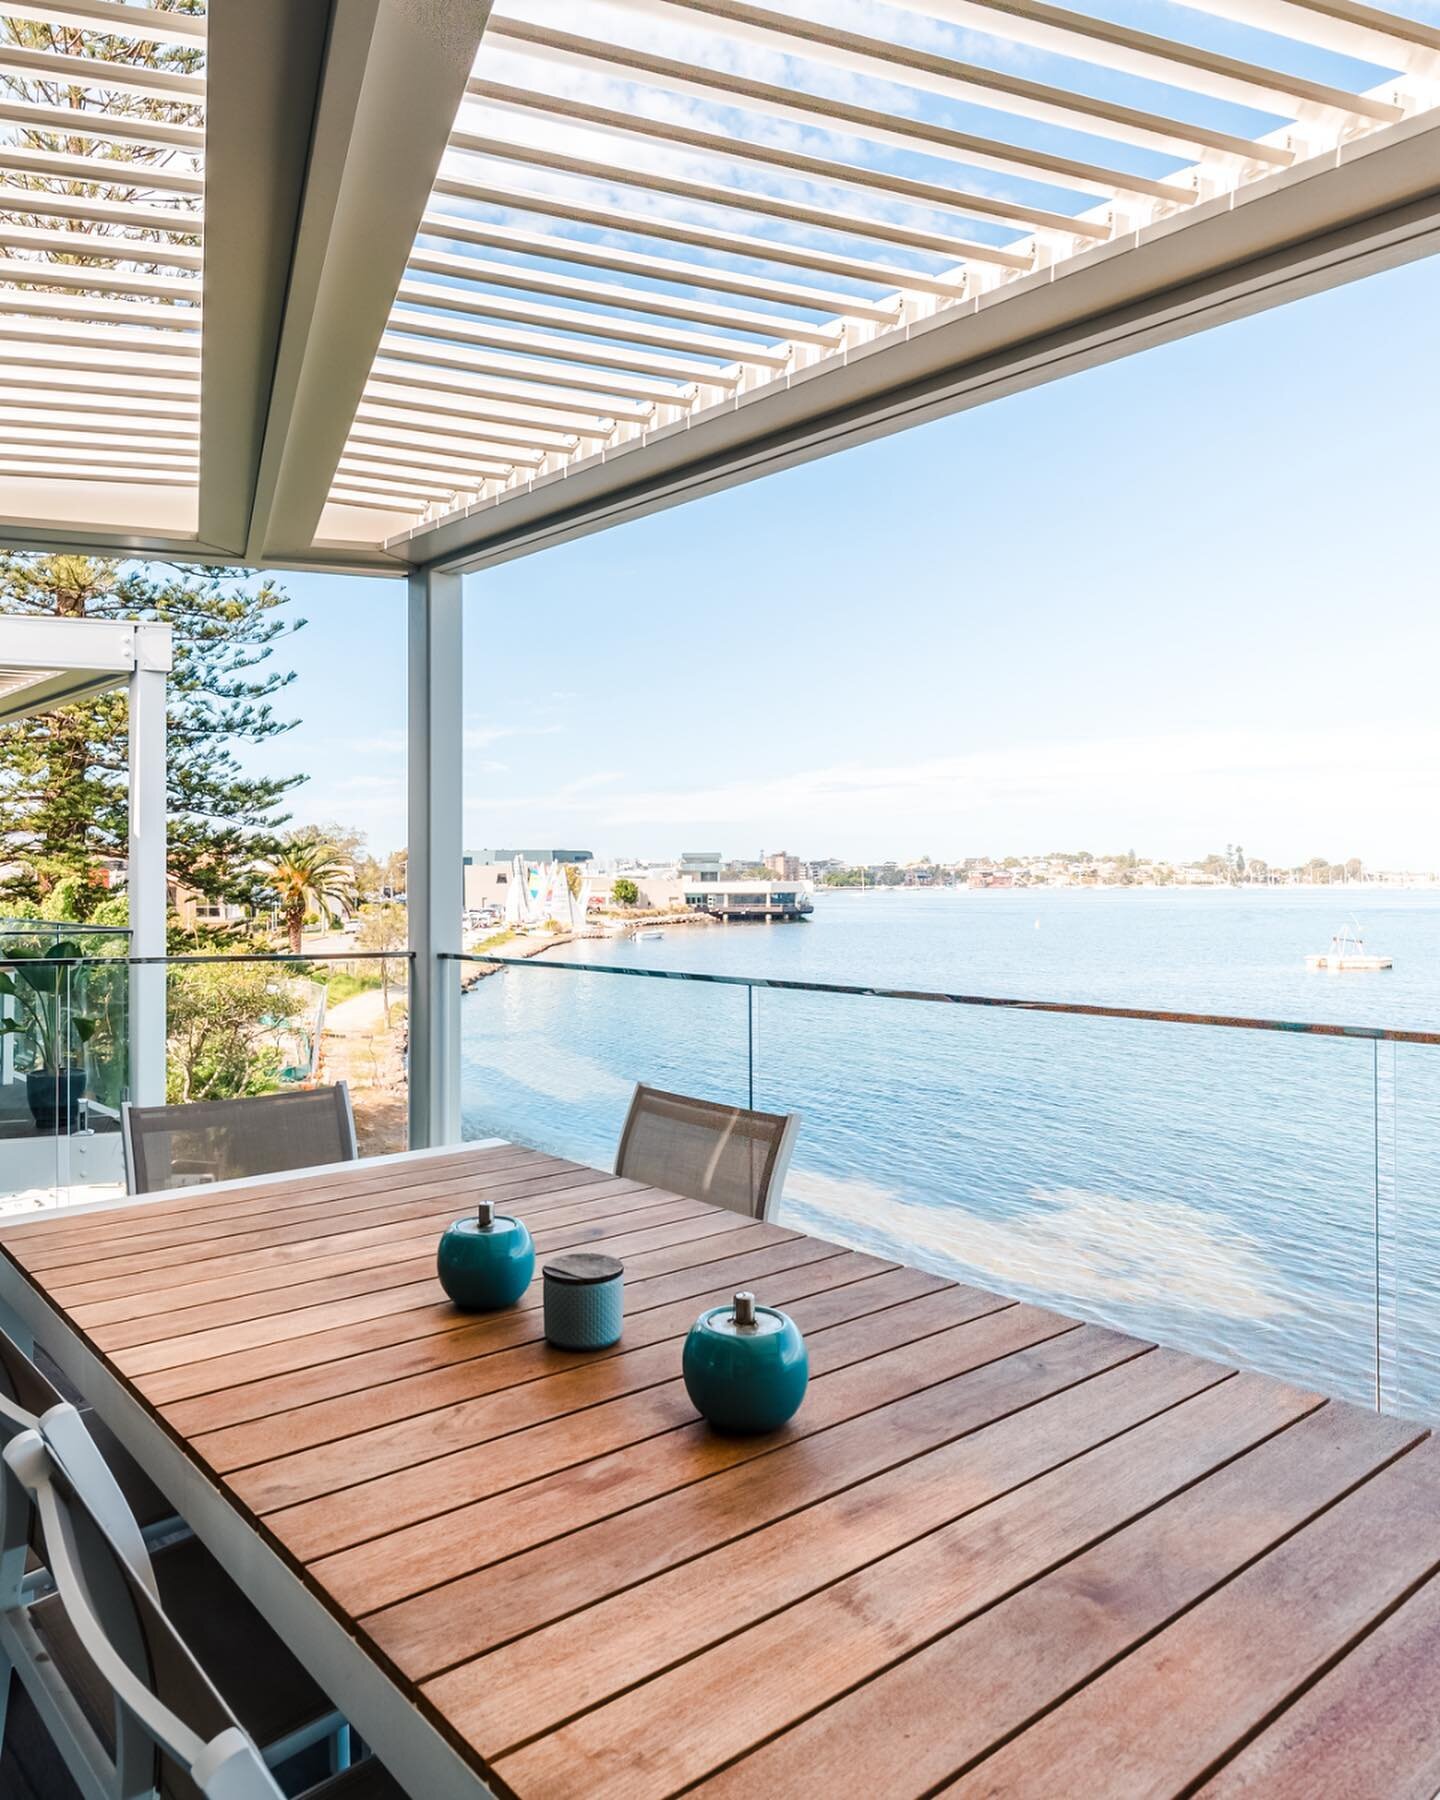 Did you know that the average Aussies spends over 90 hours per year relaxing and enjoying their patio or deck. That's almost 4 days per week! That's why we believe a beautiful outdoor living space is an absolute must-have! ☀️🌿&nbsp;

Here are our to